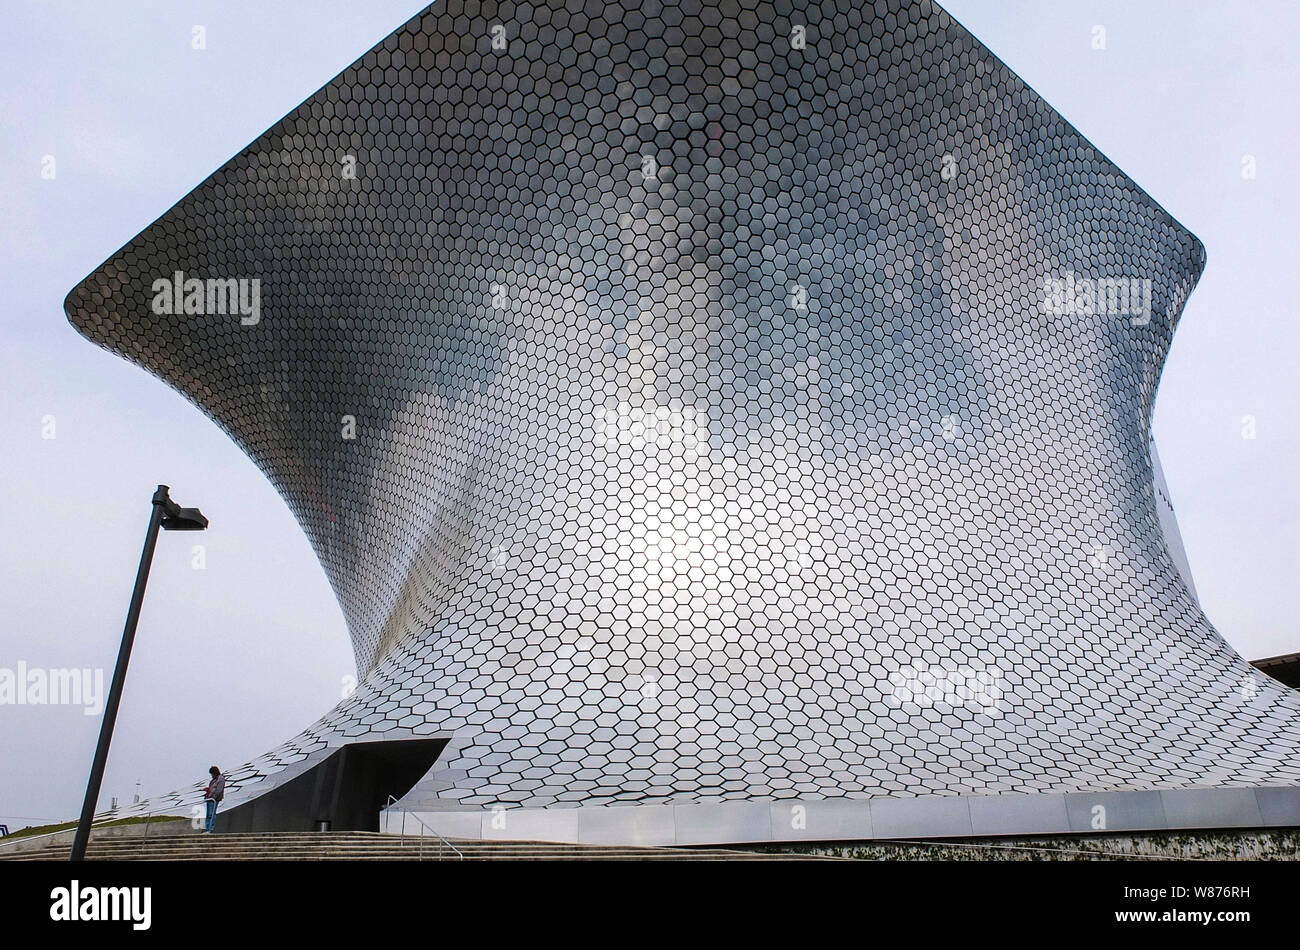 The Museo Soumaya is a private museum in the Nuevo Polanco area of Mexico City with free admission. It is owned by the Carlos Slim Foundation and contains the extensive art, religious relics, historical documents, and coin collection of Carlos Slim and his late wife Soumaya, after whom the museum was named. The museum holds works by many of the best known European artists from the 15th to the 20th century. It contains a large collection of casts of sculptures by Auguste Rodin. The museum was founded in 1994. In 2011 it opened a new location which cost over $70 million to build. The new buildin Stock Photo